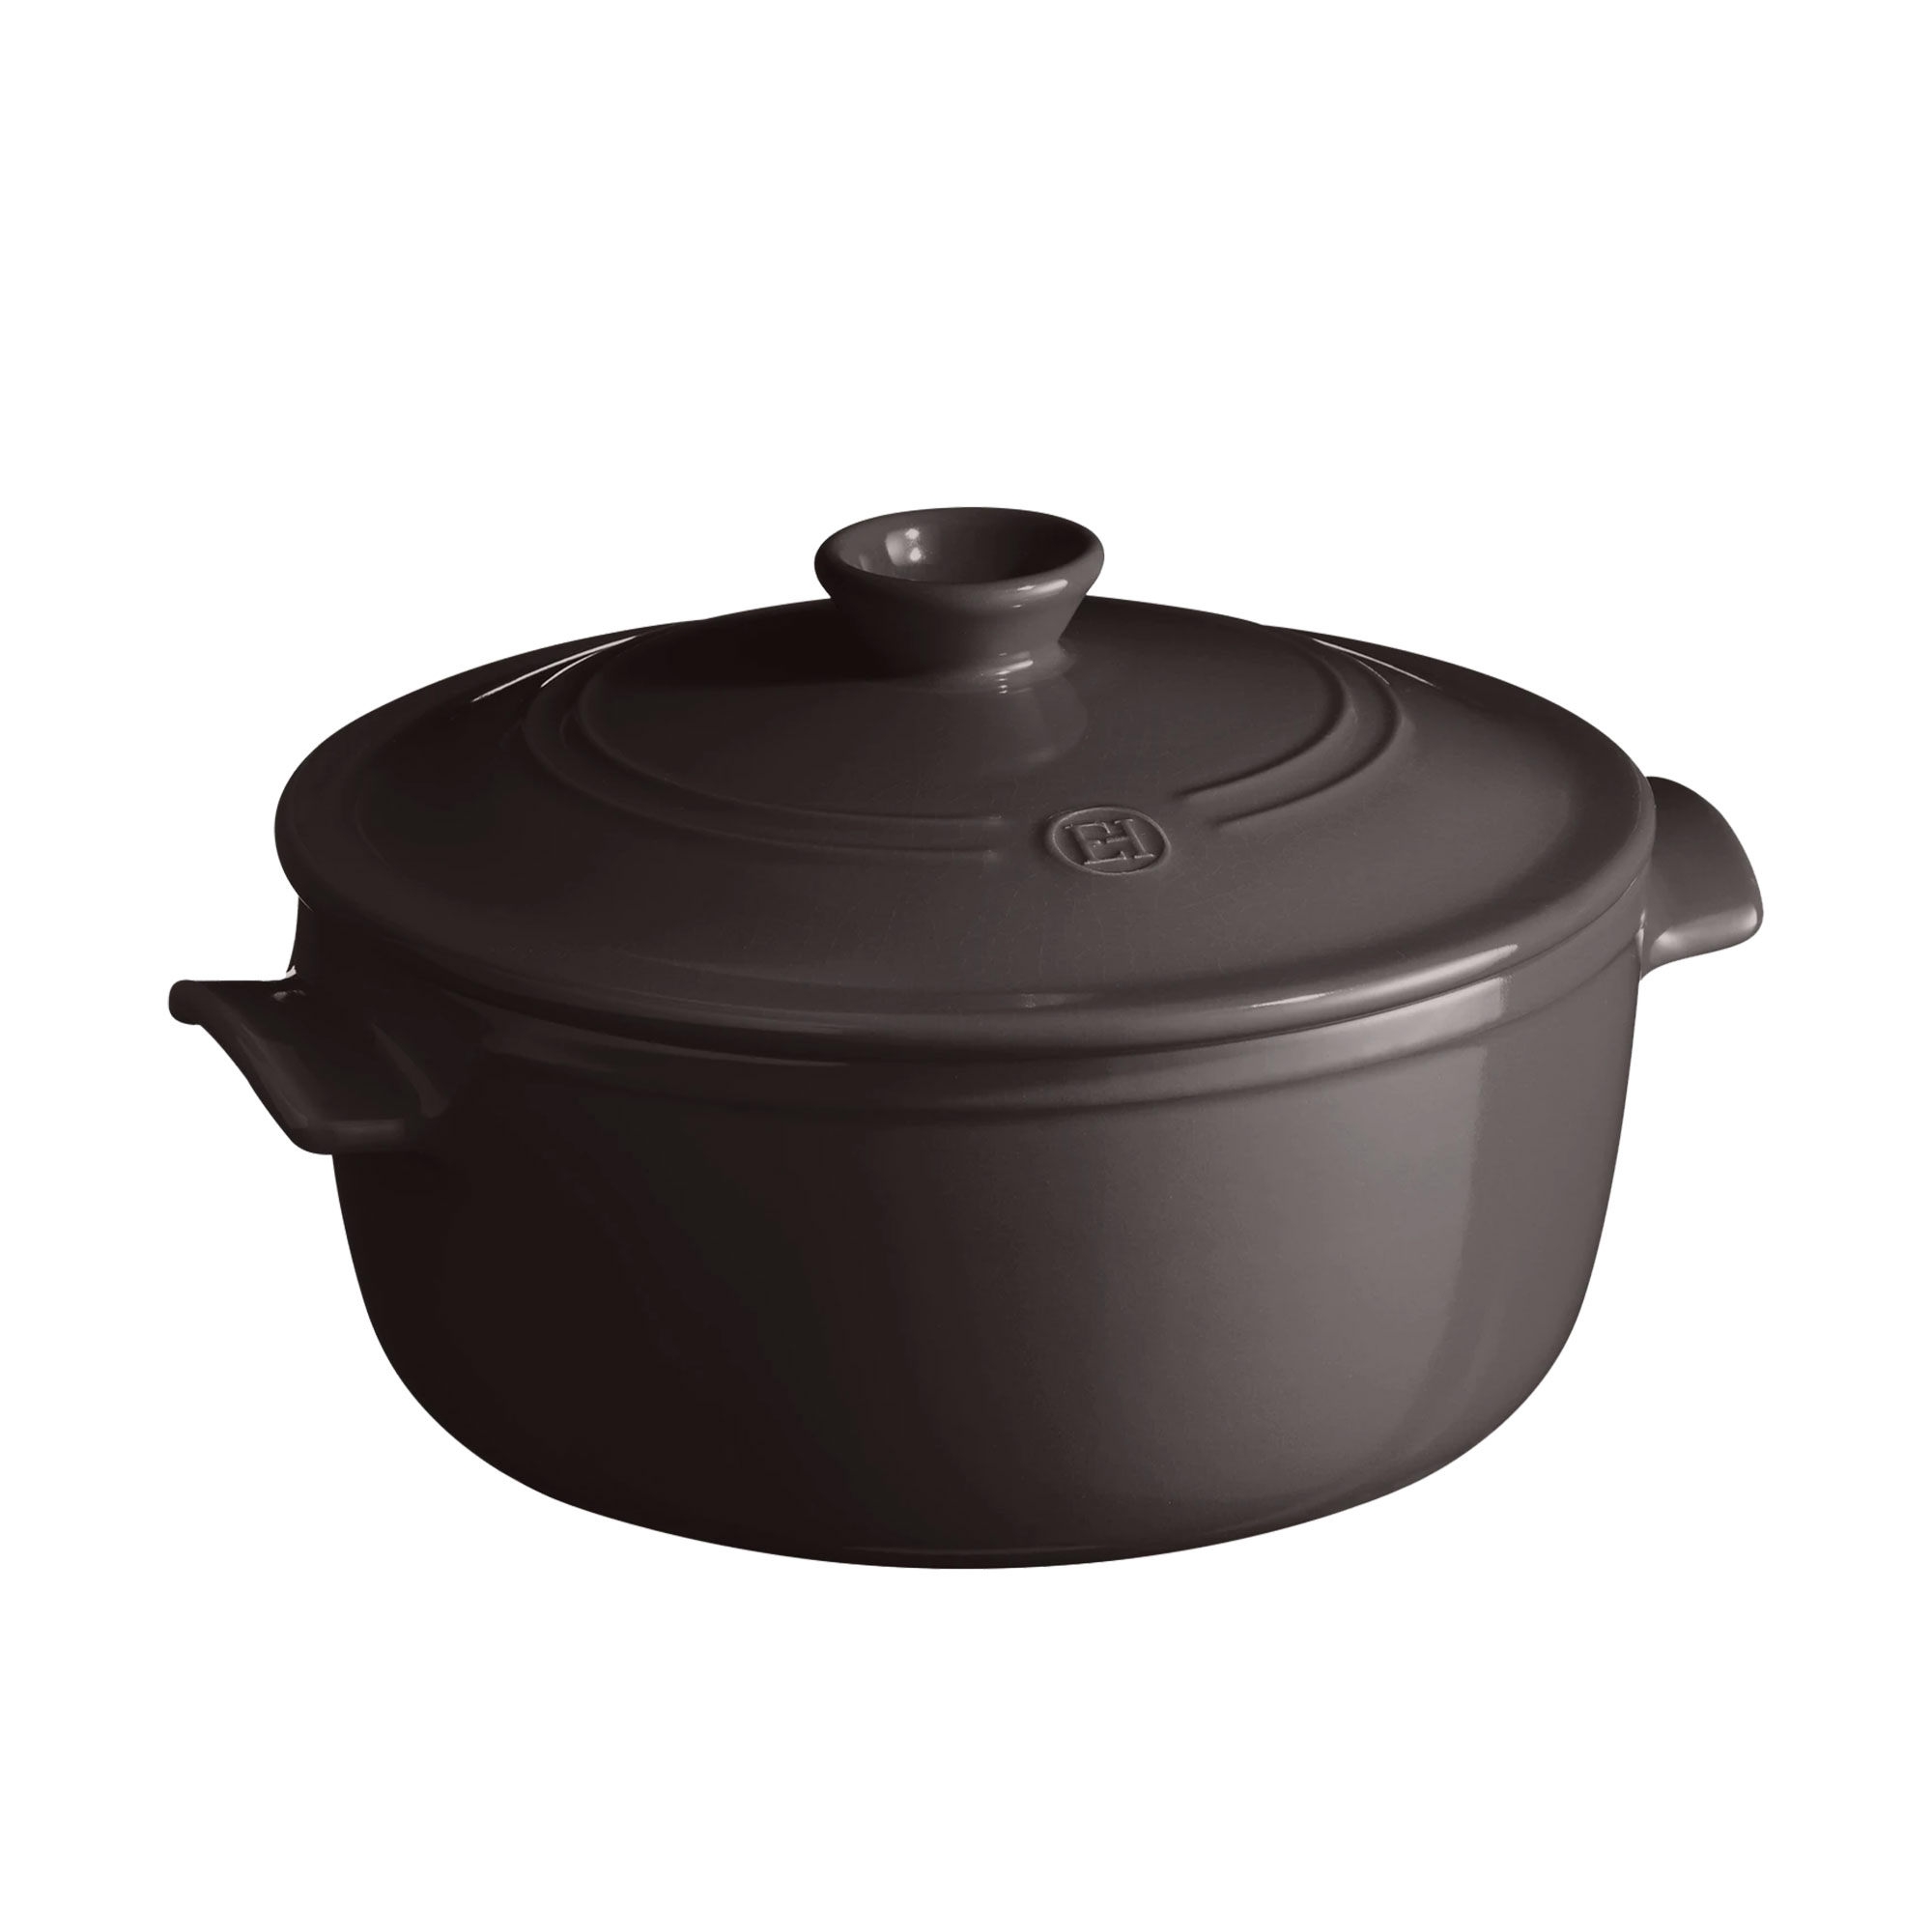 Emile Henry Round Stewpot 2.5L Charcoal Image 1